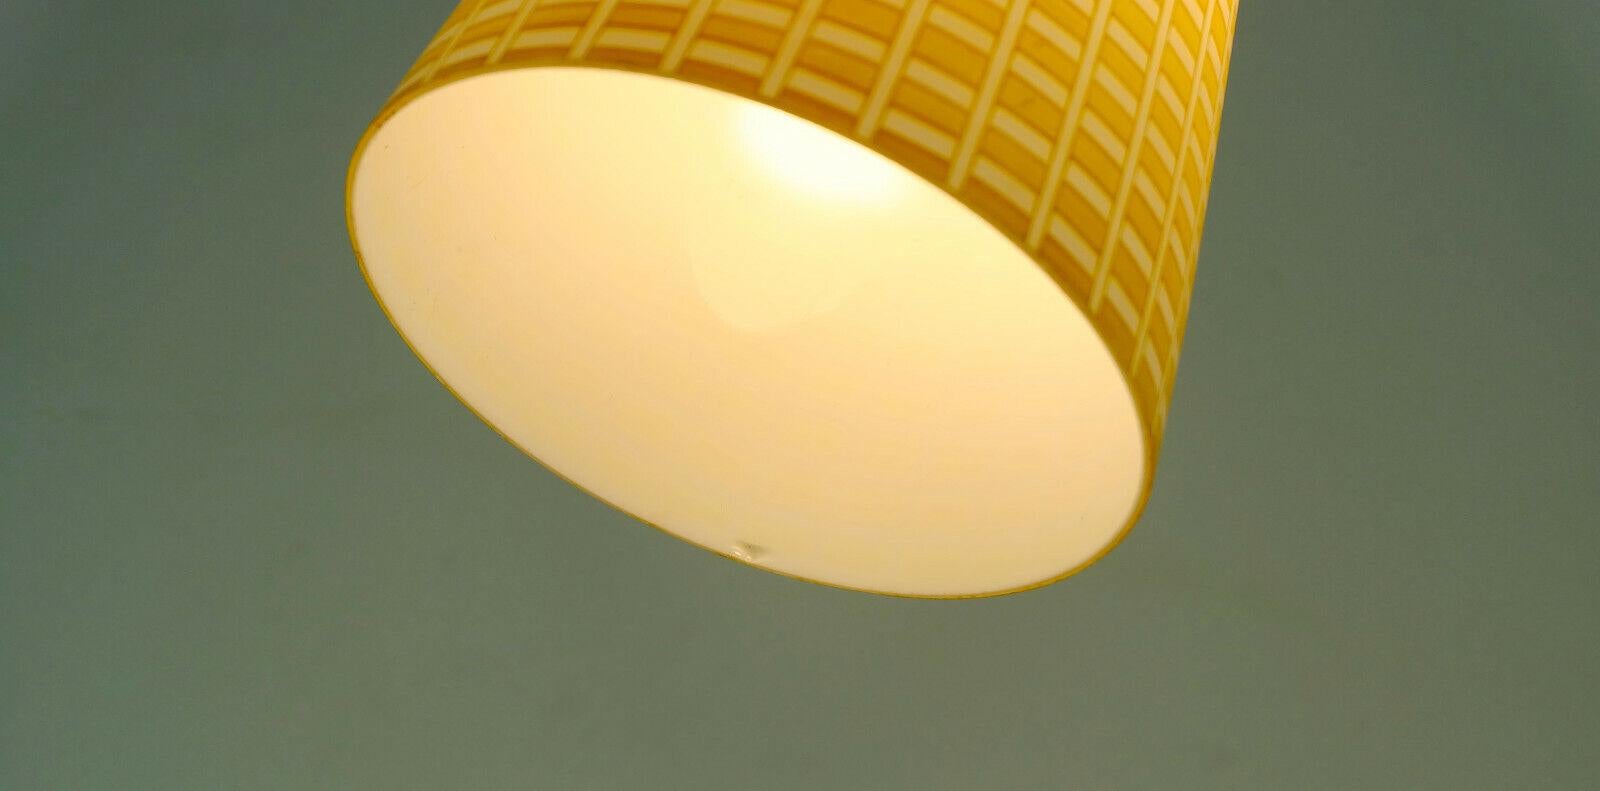 German Peill & Putzler Midcentury Pendant Lamp 1950s Yellow and White Glass For Sale